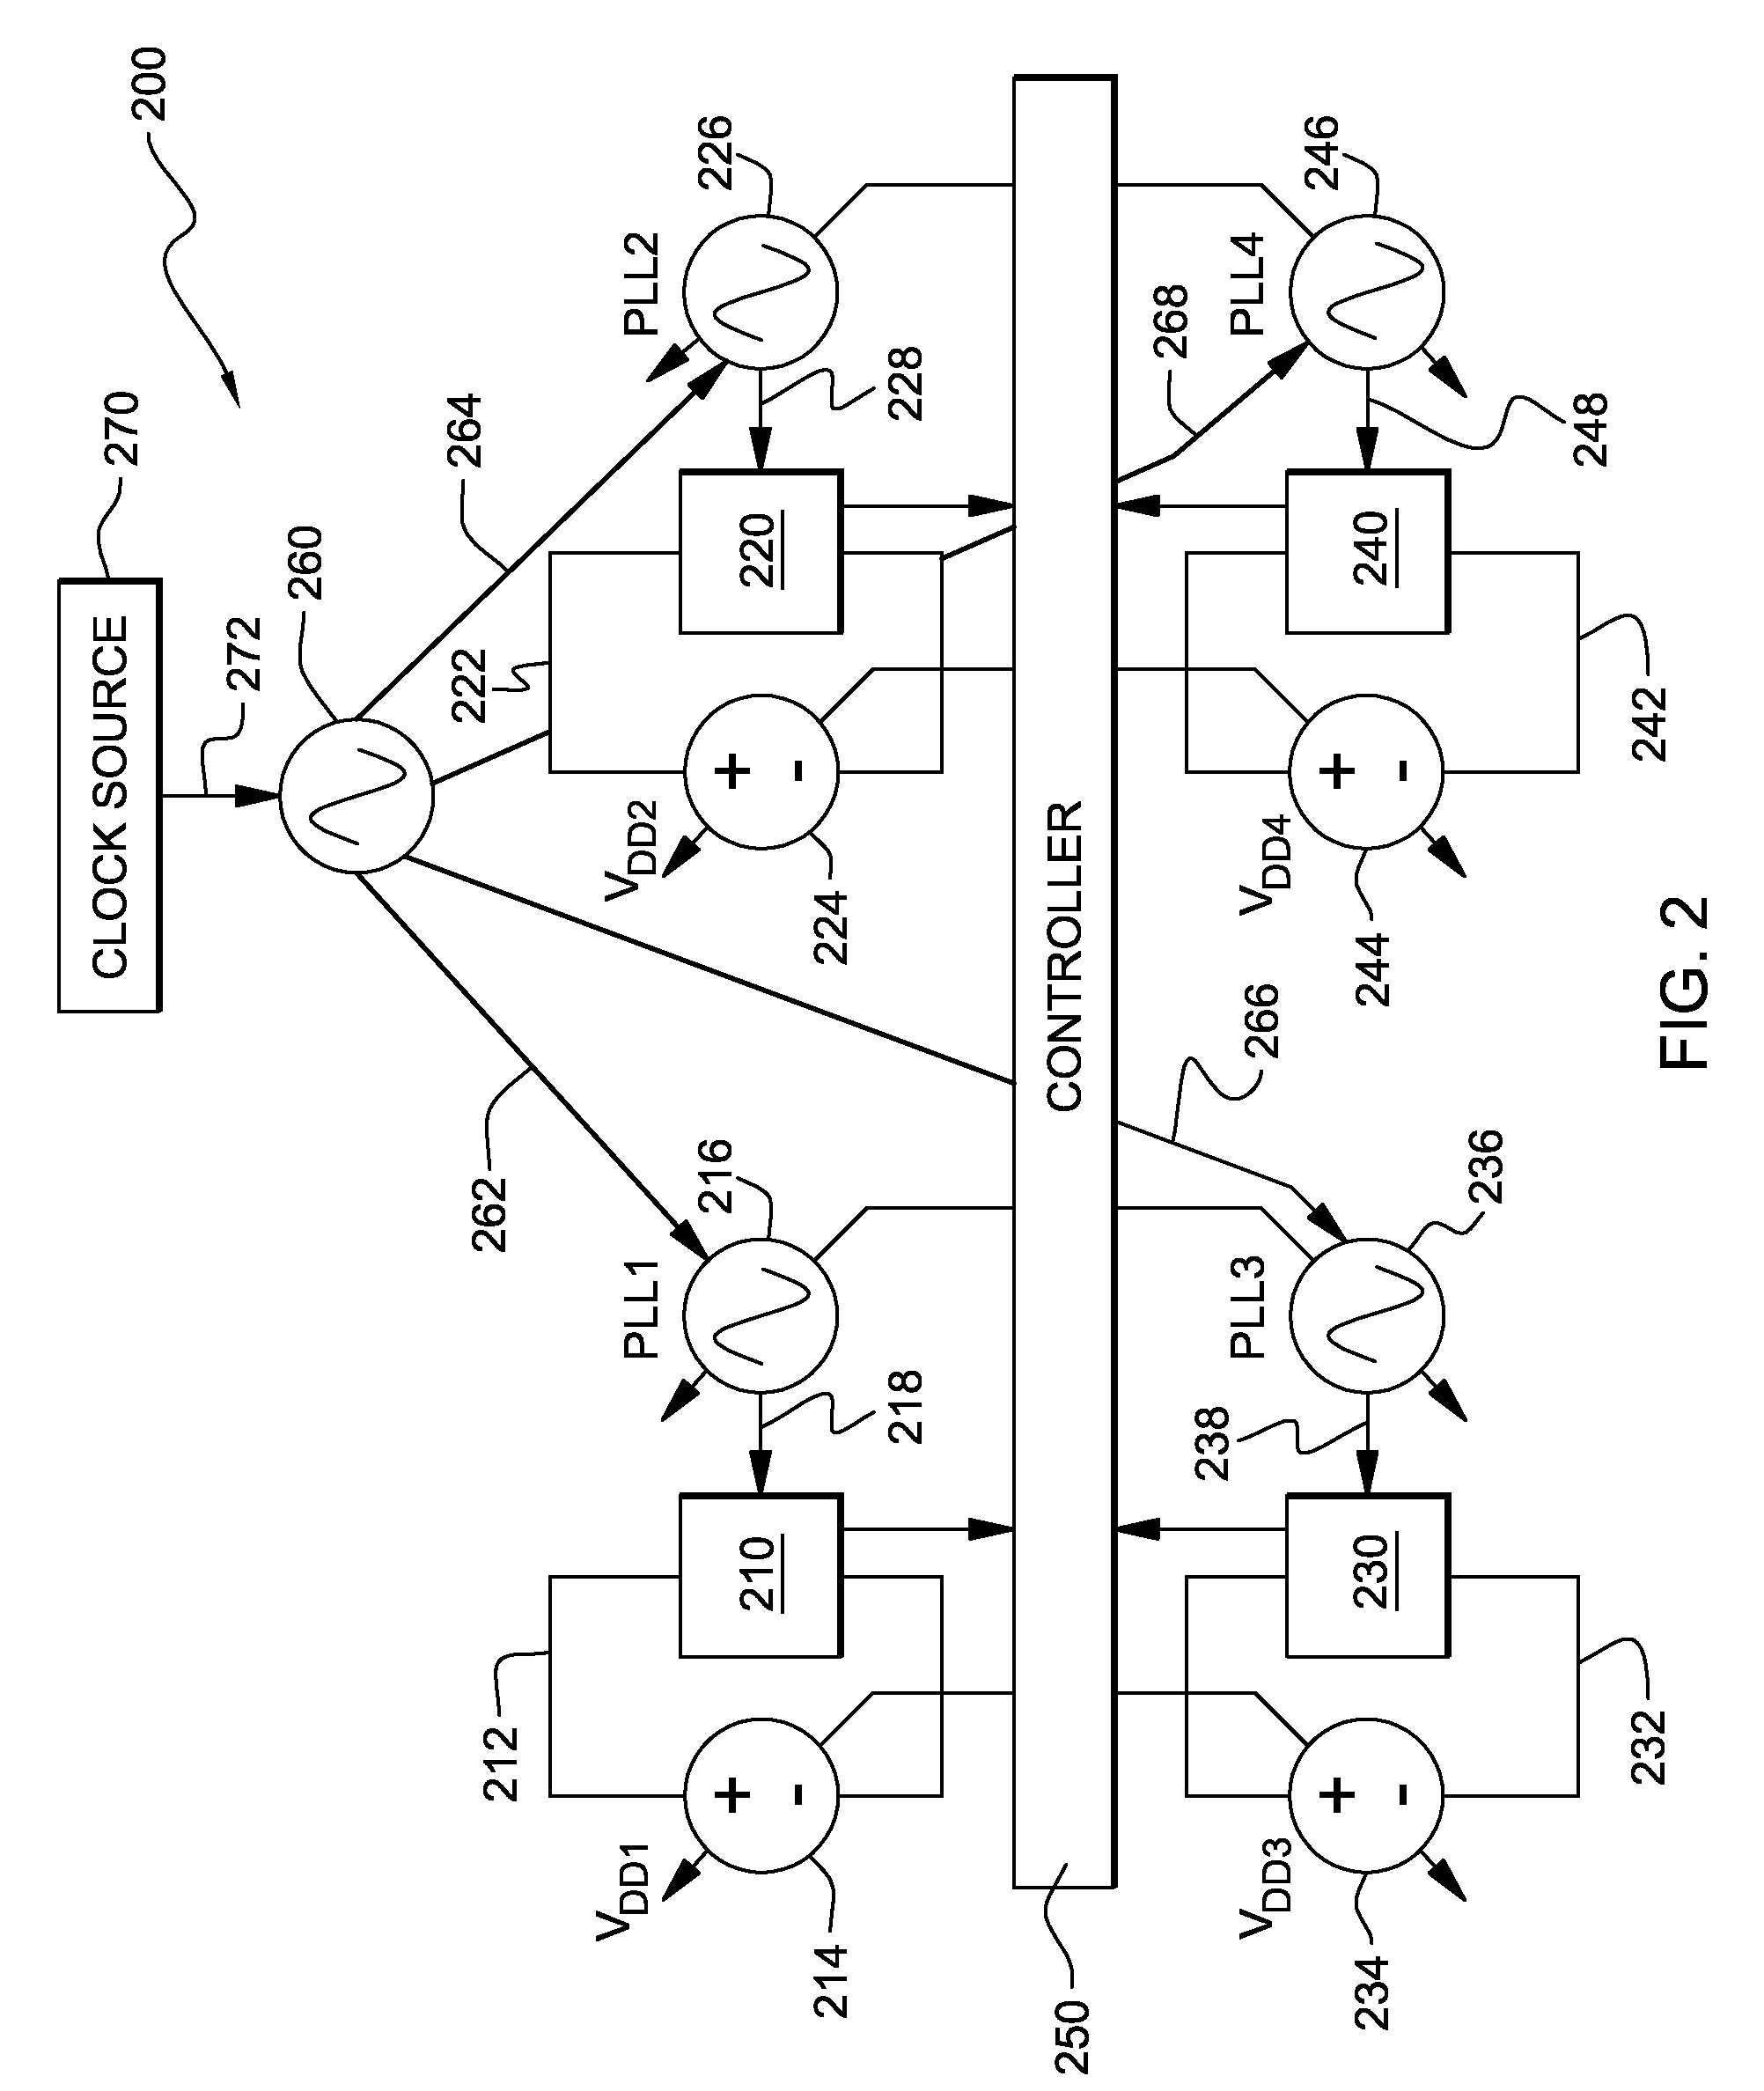 Apparatus, method and program product for adaptive real-time power and perfomance optimization of multi-core processors